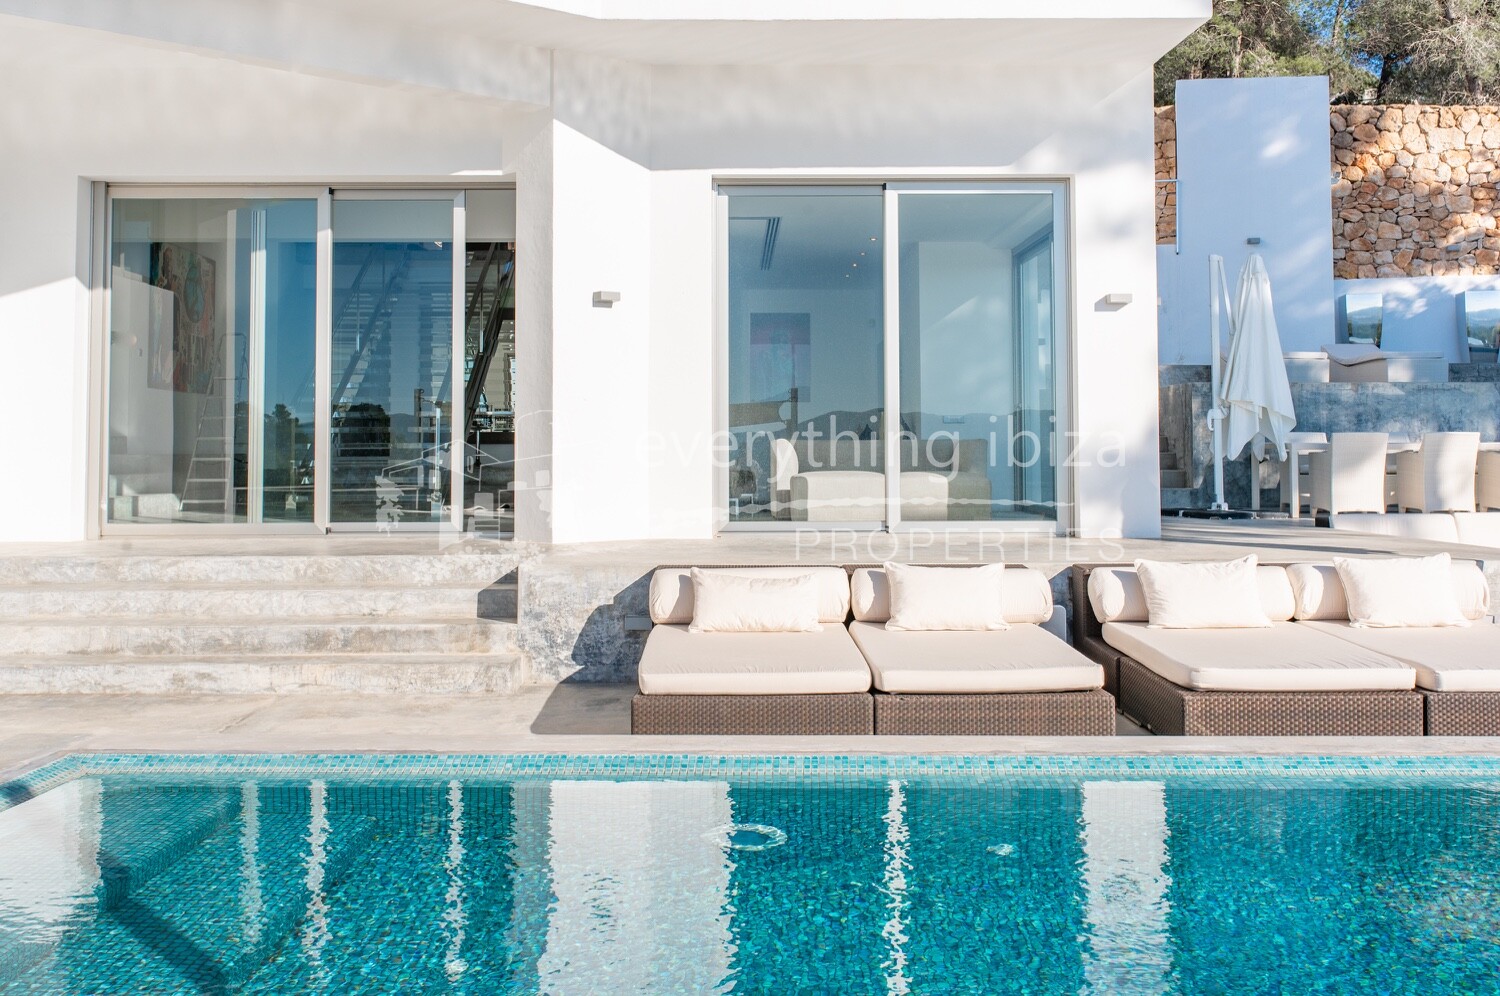 Stunning Hilltop Villa of the Finest Quality with Amazing Views in Can Furnet, ref. 1624, for sale in Ibiza by everything ibiza Properties